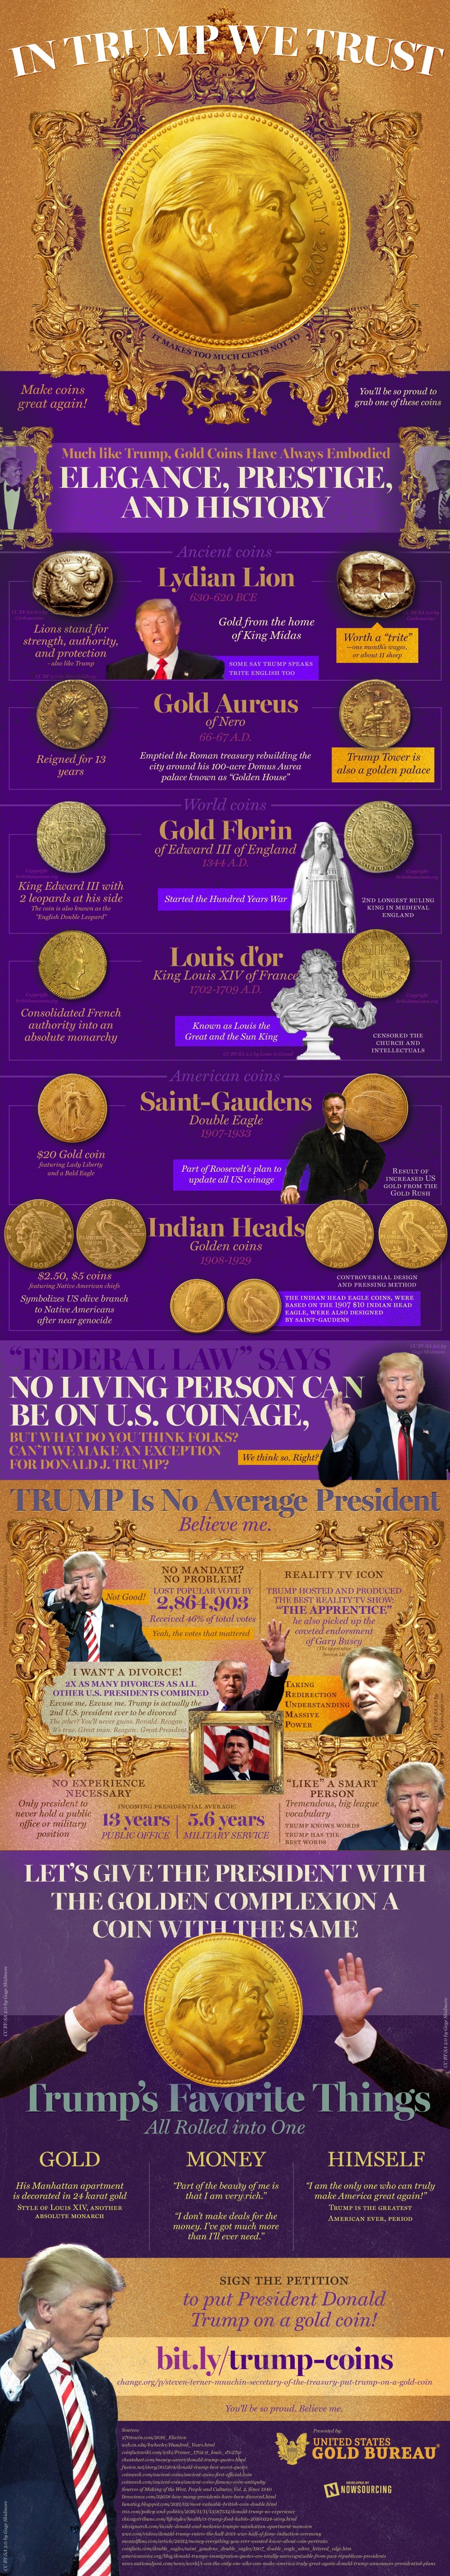 President Trump’s Face On A Gold Coin?